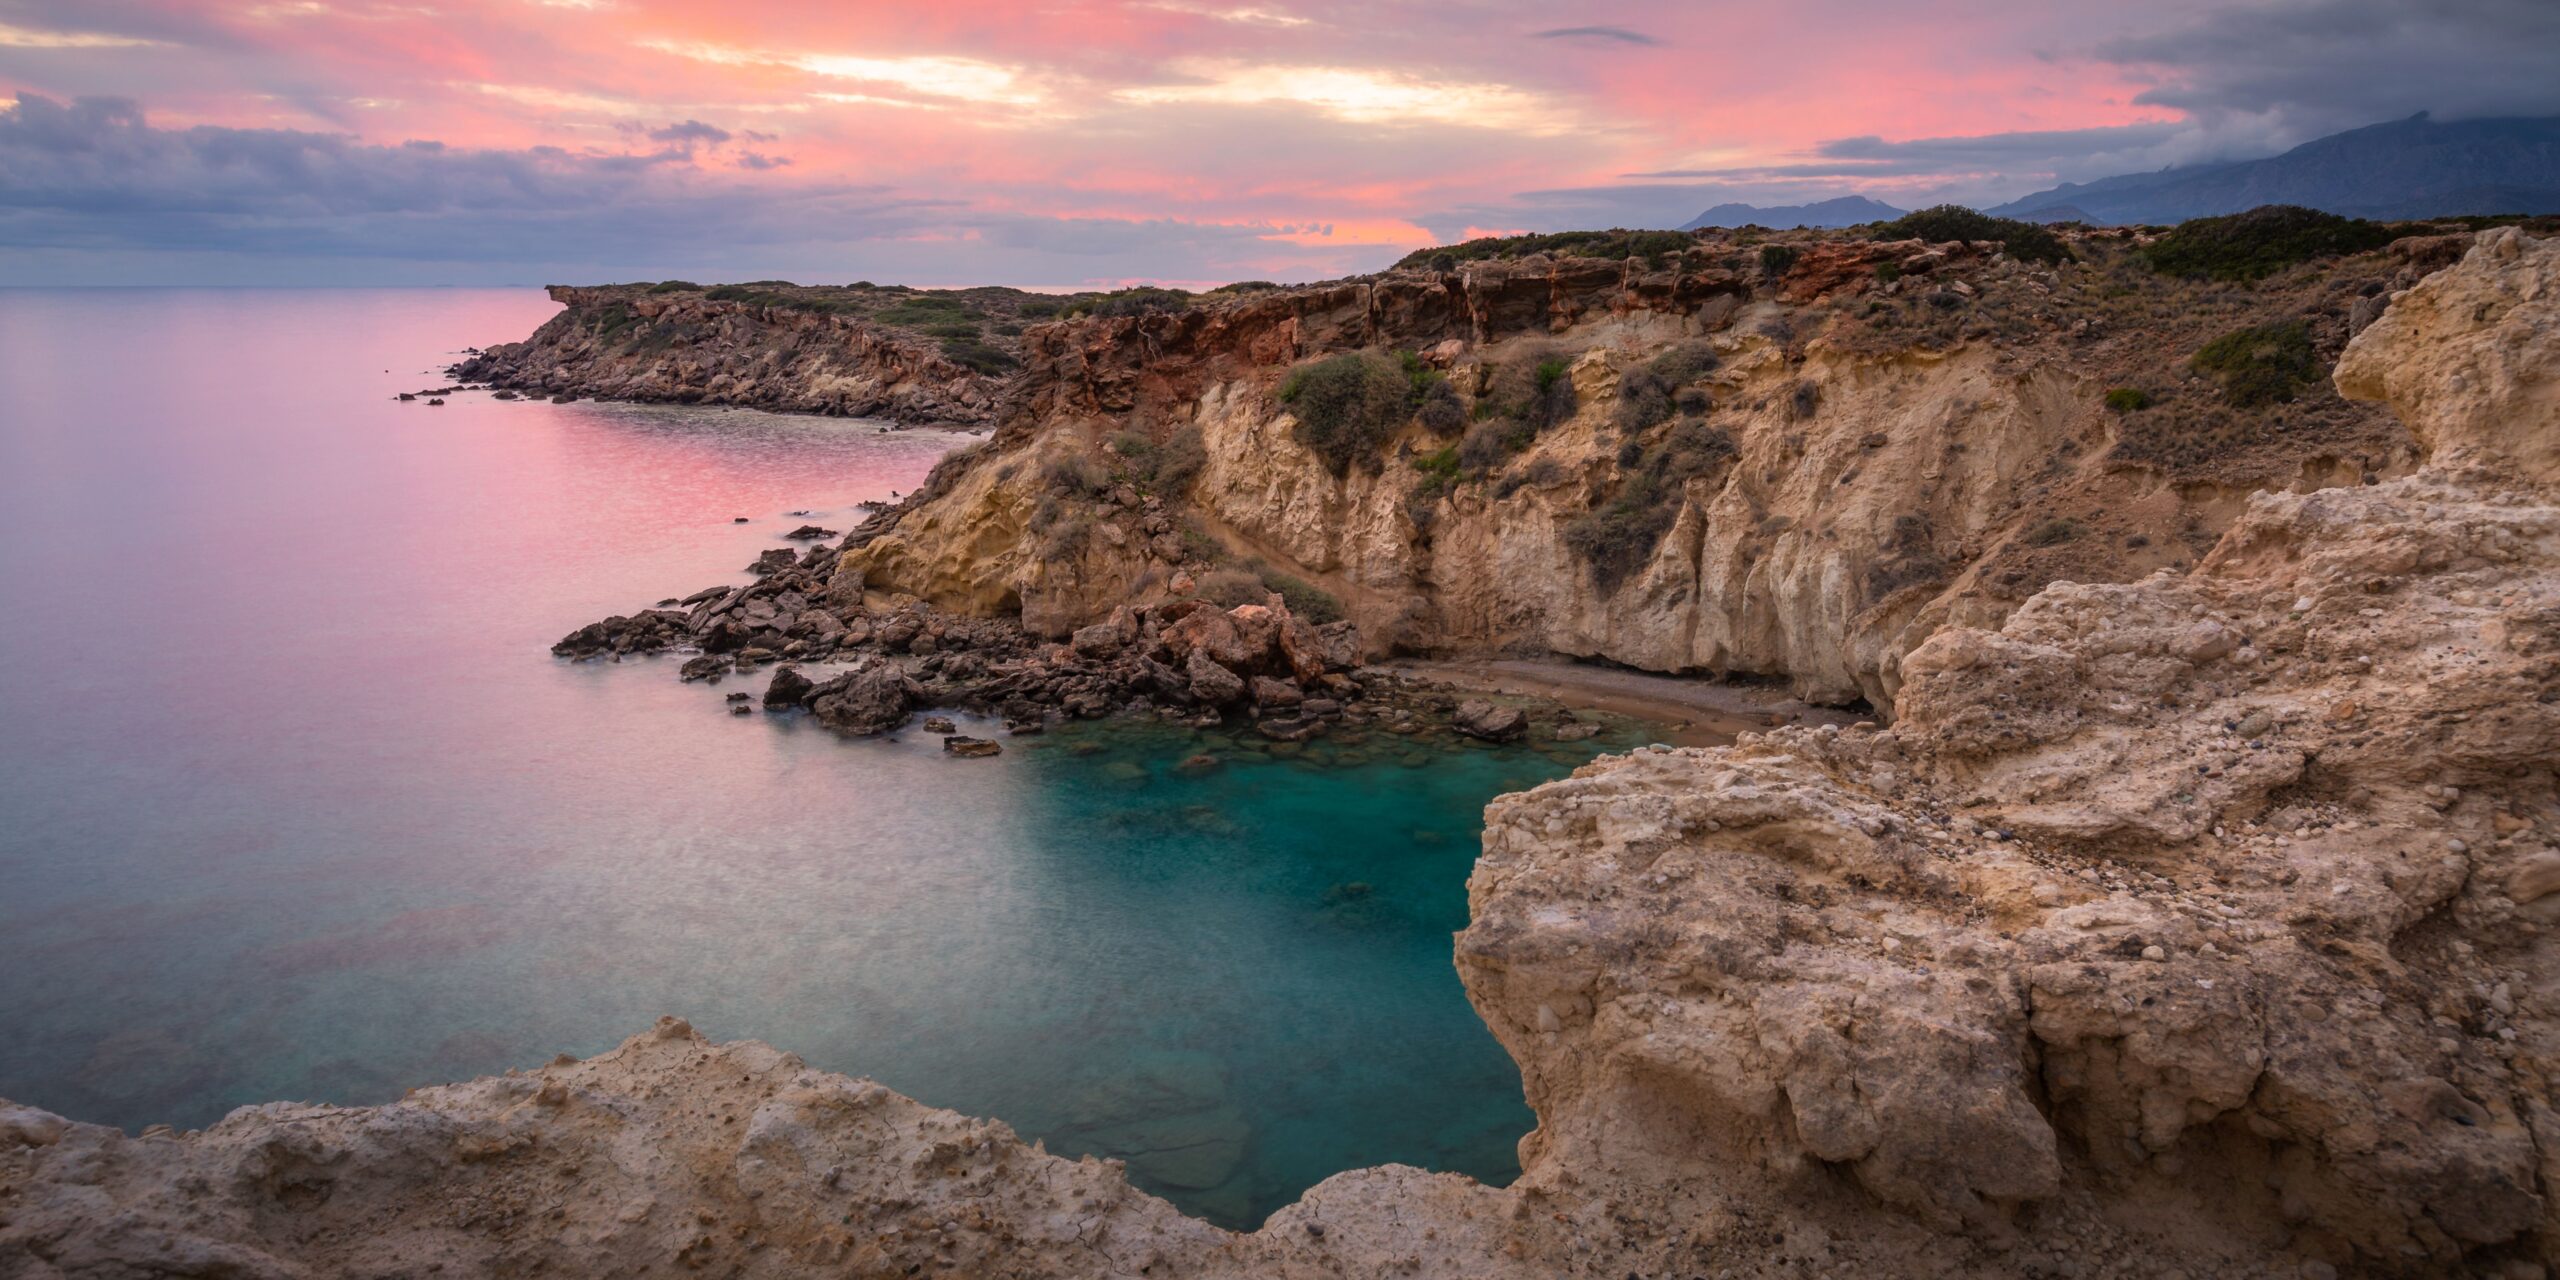 A serene cove with rocky cliffs and turquoise waters under a sunset sky.